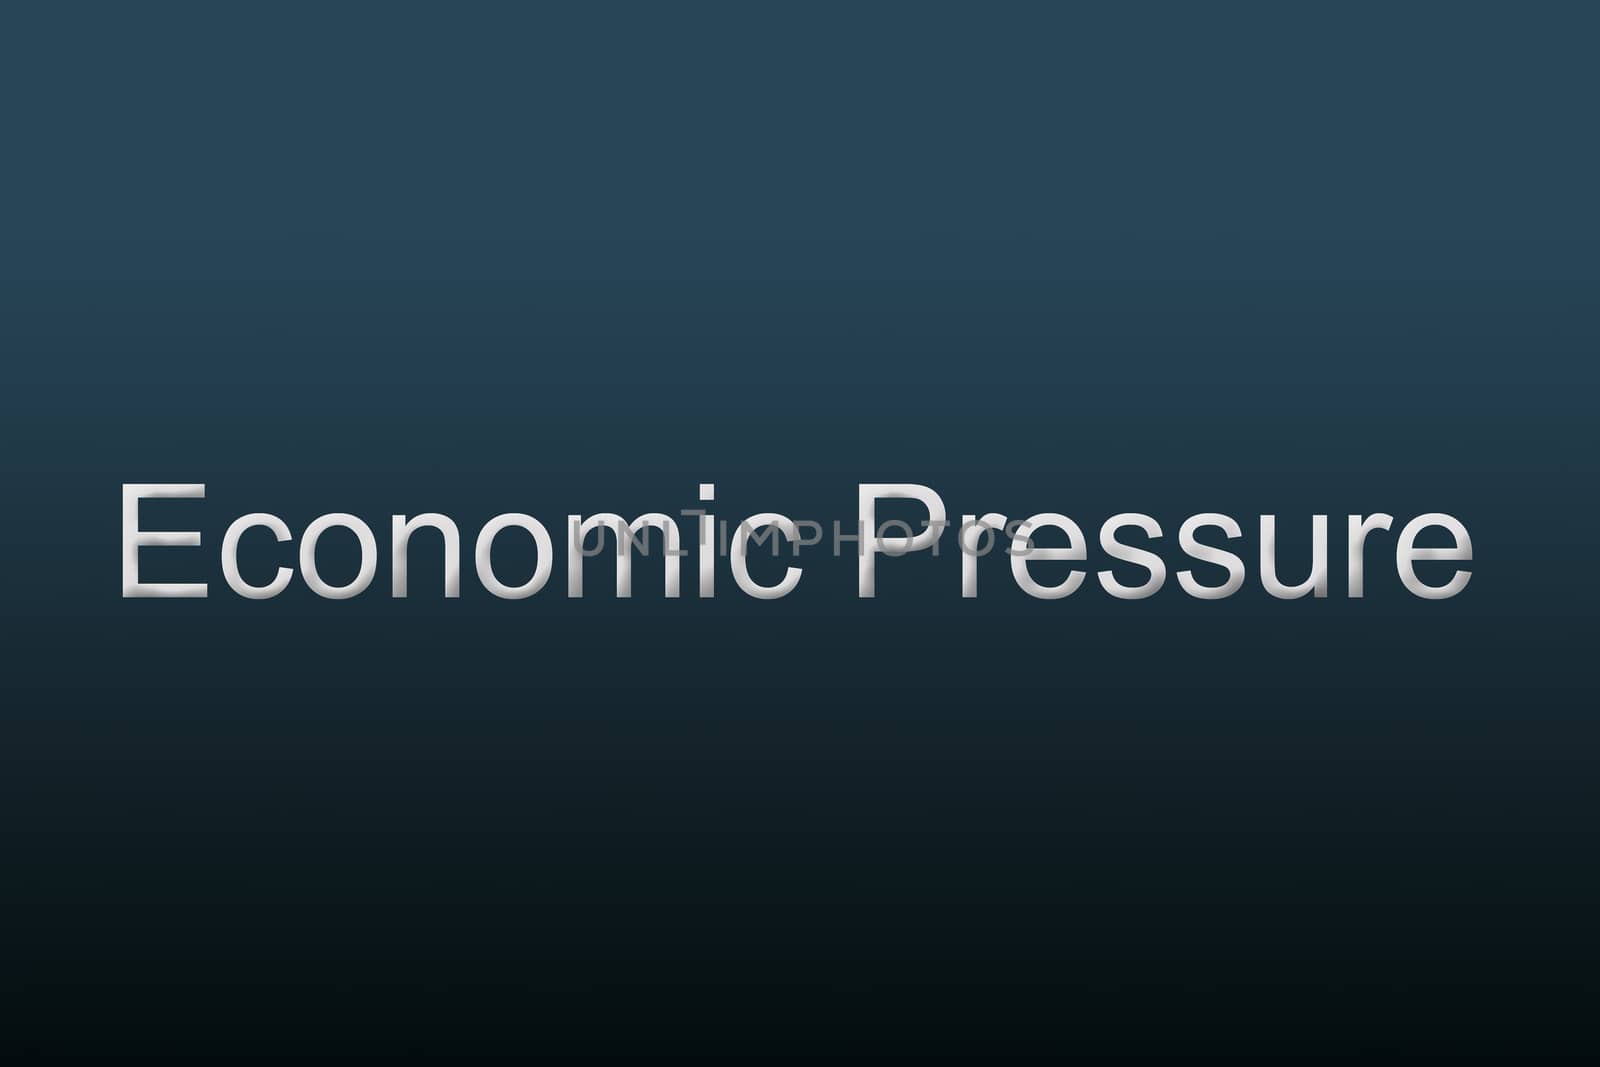 Economic Pressure written against a blue background to understand a financial concept